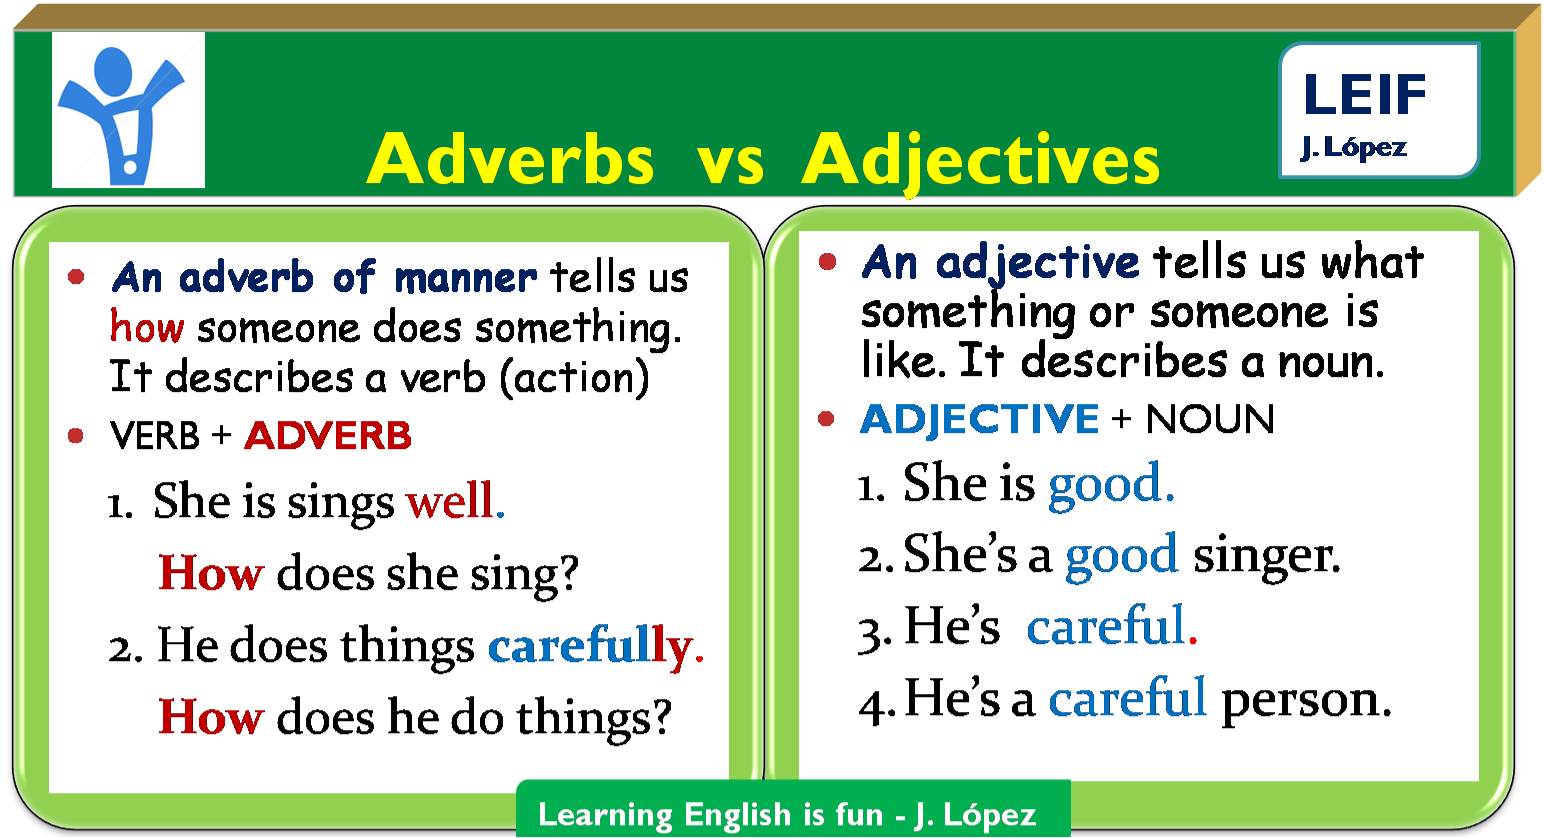 Adverbs rules. Adjectives and adverbs правило. Adverbs правило. Adverbs правила. Adverbs and adjectives правила.